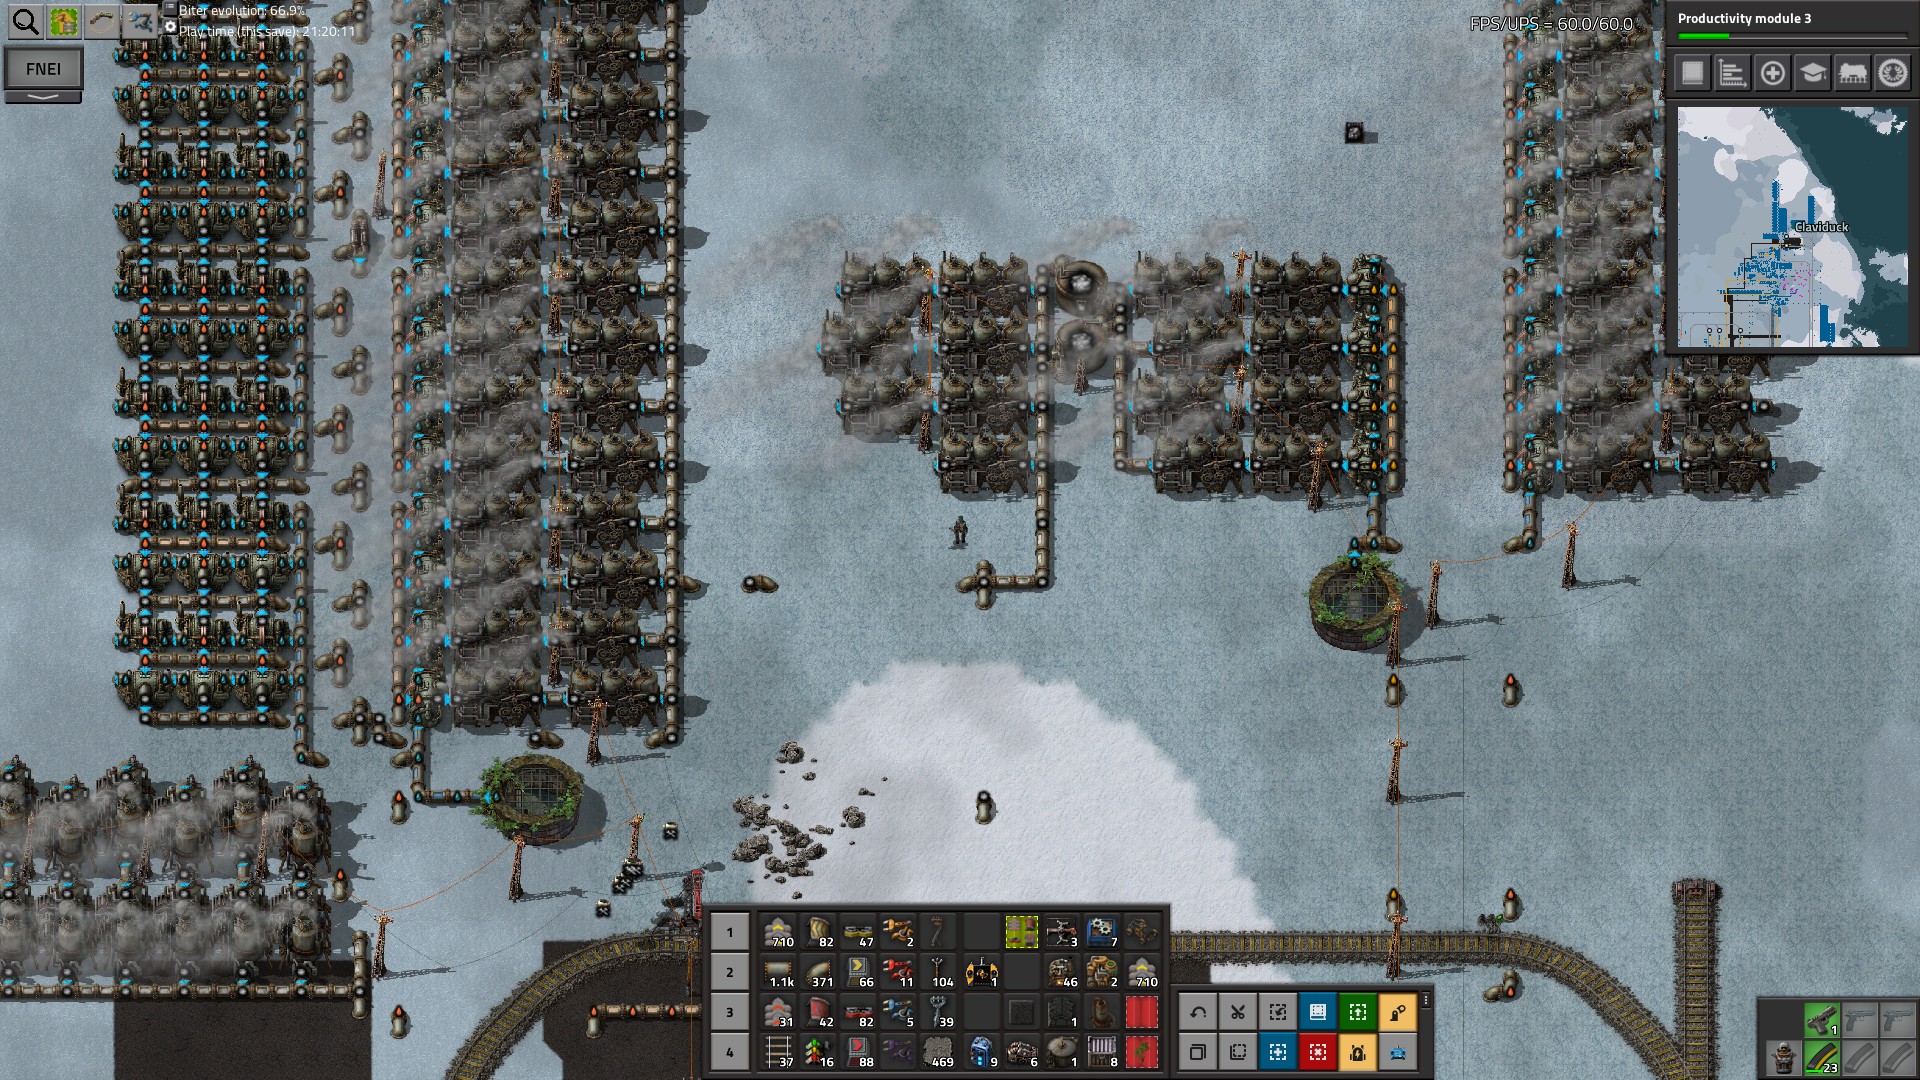 Energy + Fuel (Here with Diesellocomotive mod)